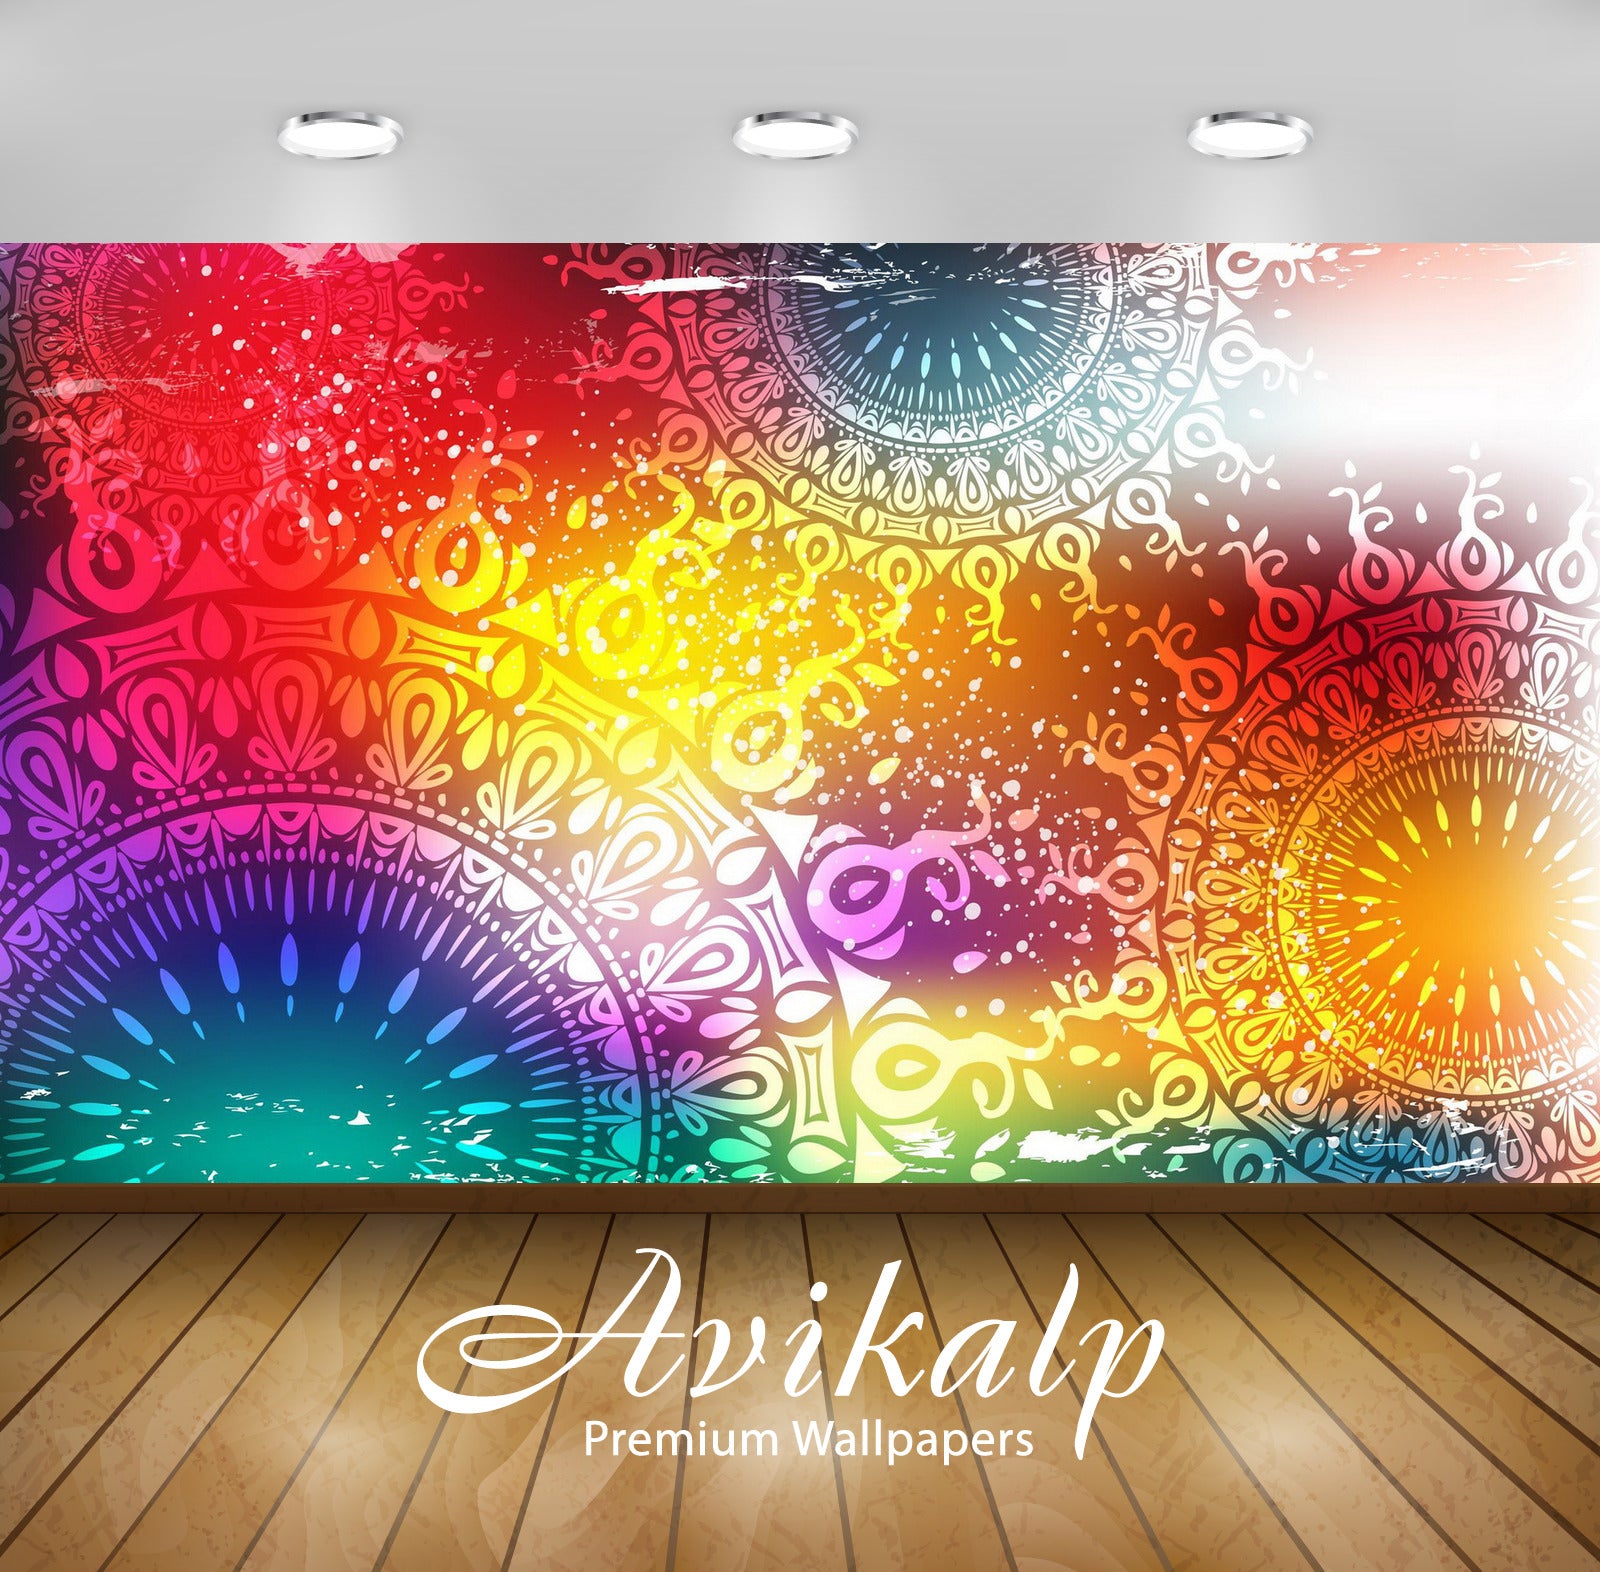 Avikalp Exclusive Awi4571 Psychedelic Suns Full HD Wallpapers for Living room, Hall, Kids Room, Kitc